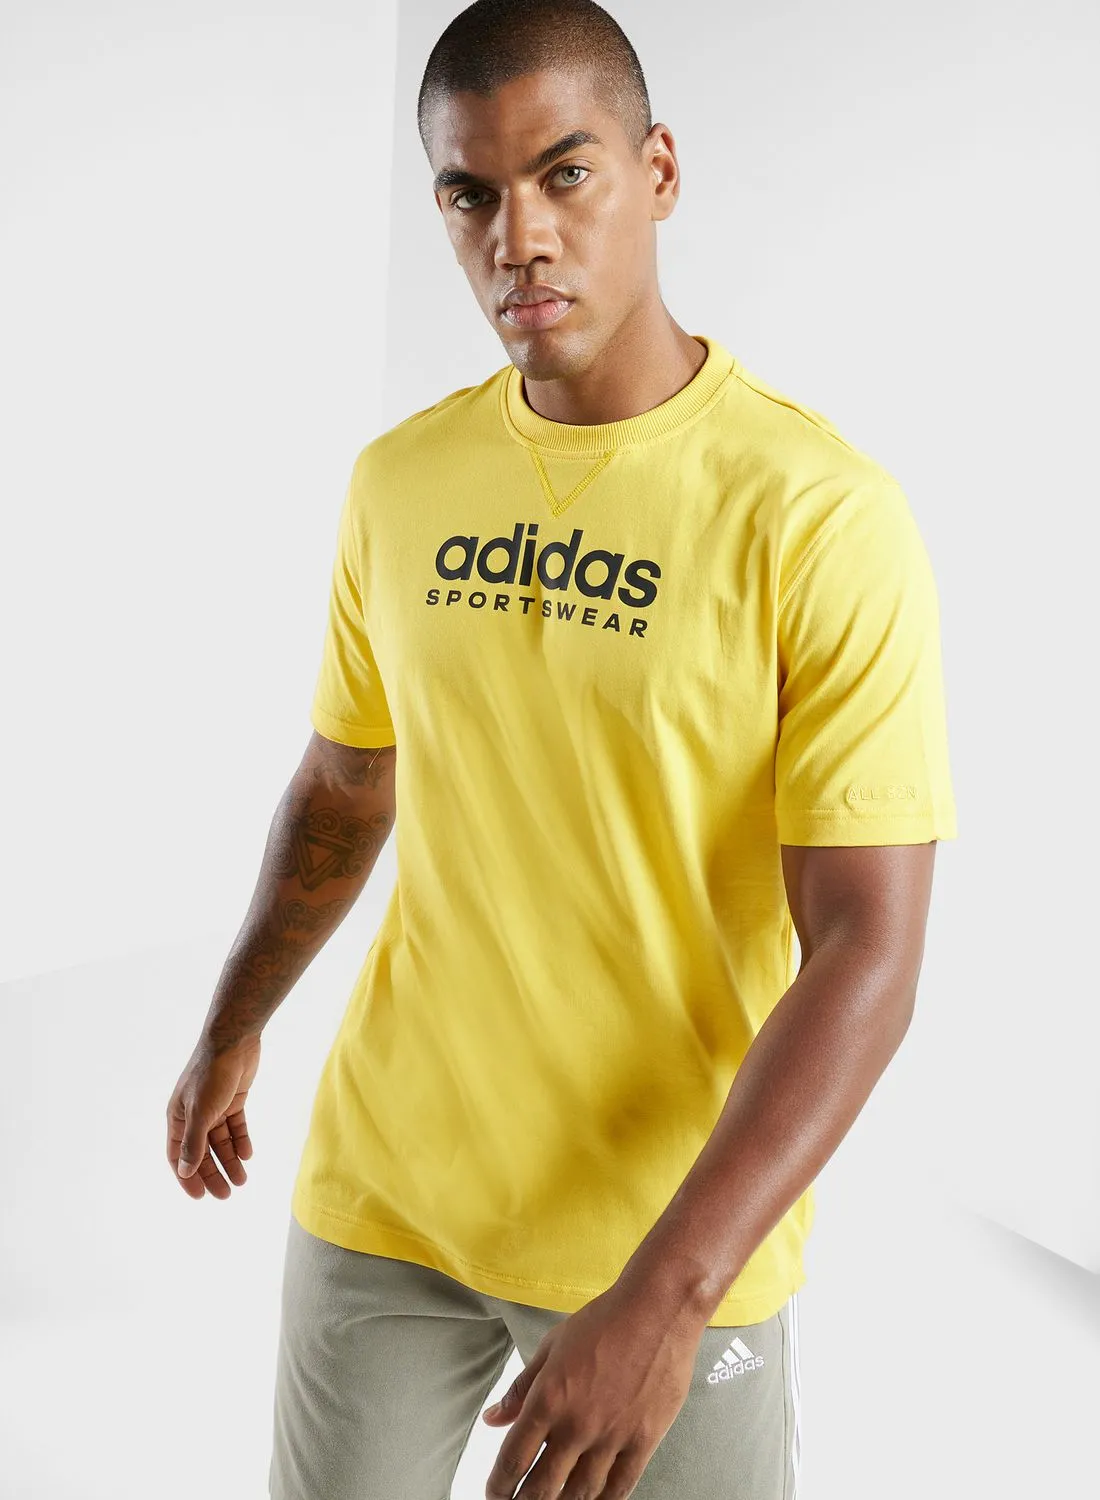 Adidas All Szn Graphic T-Shirt